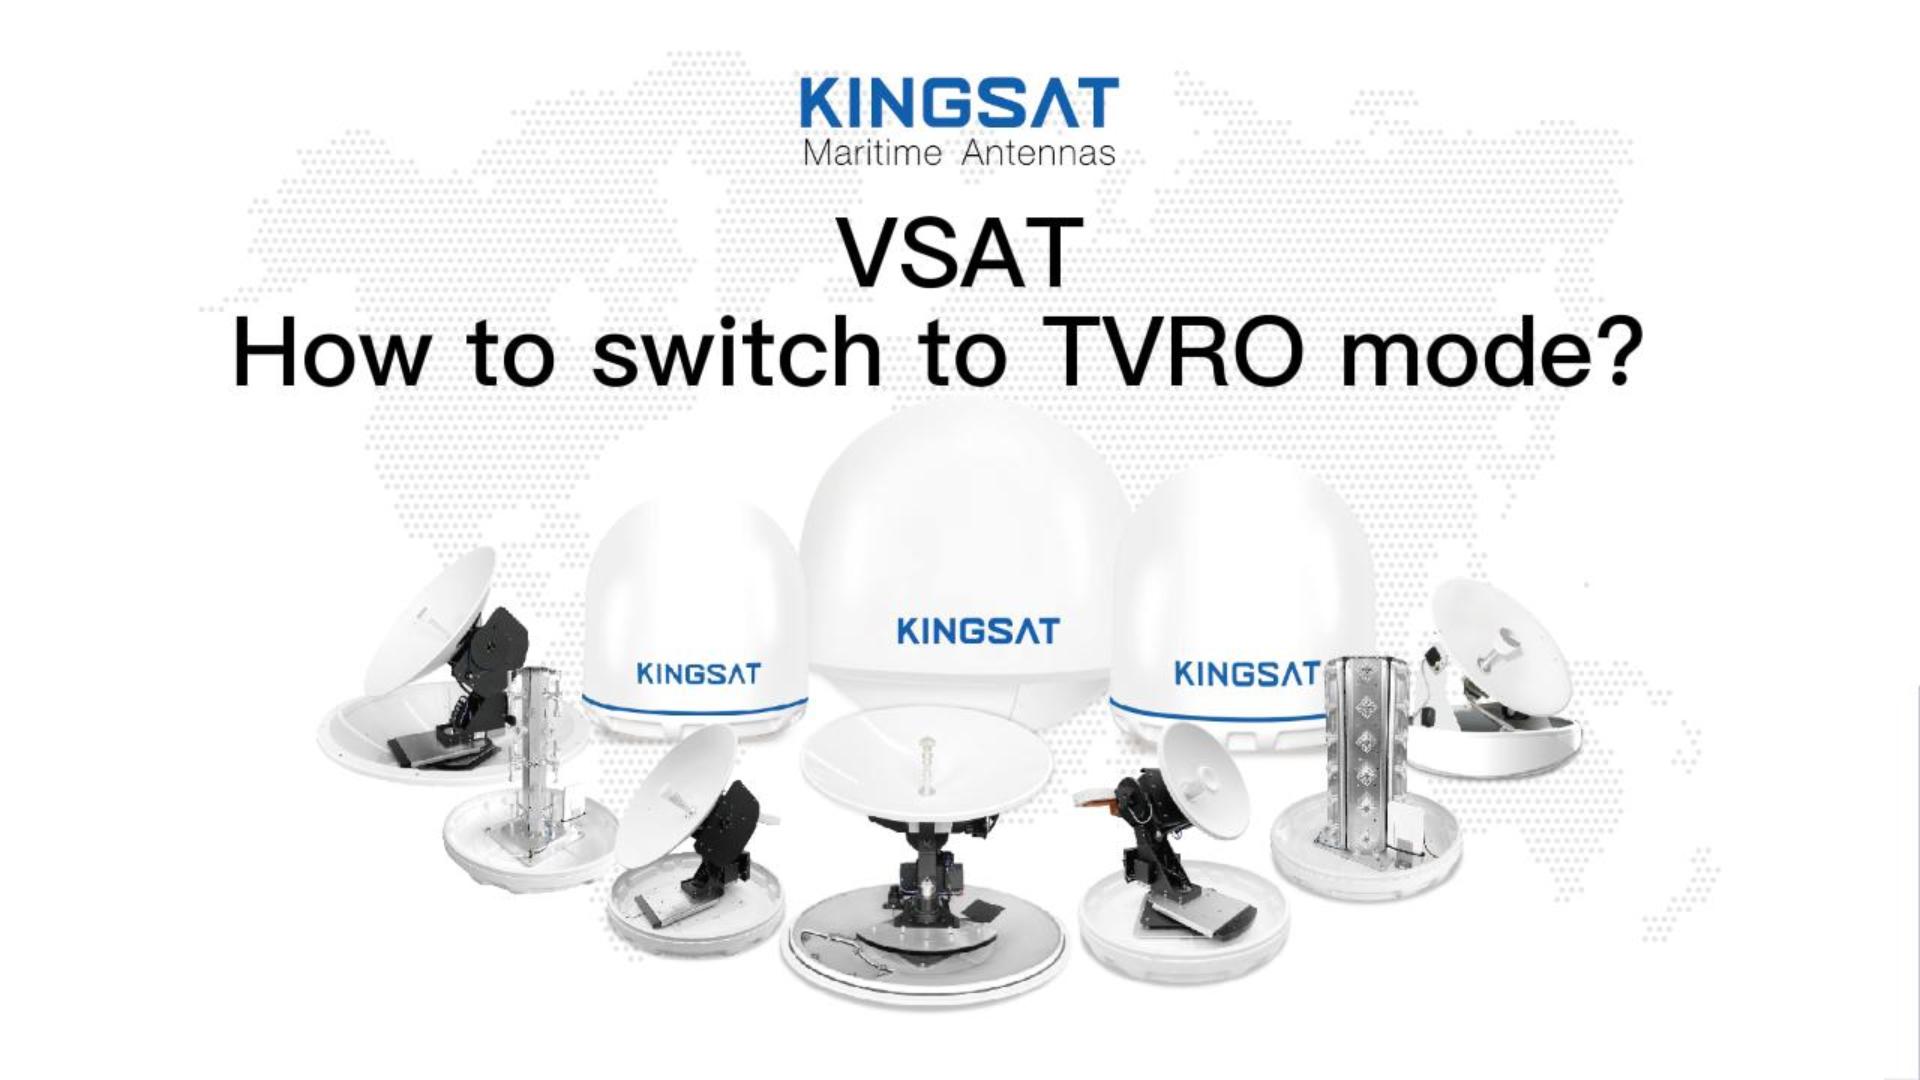 How to switch to TVRO mode?